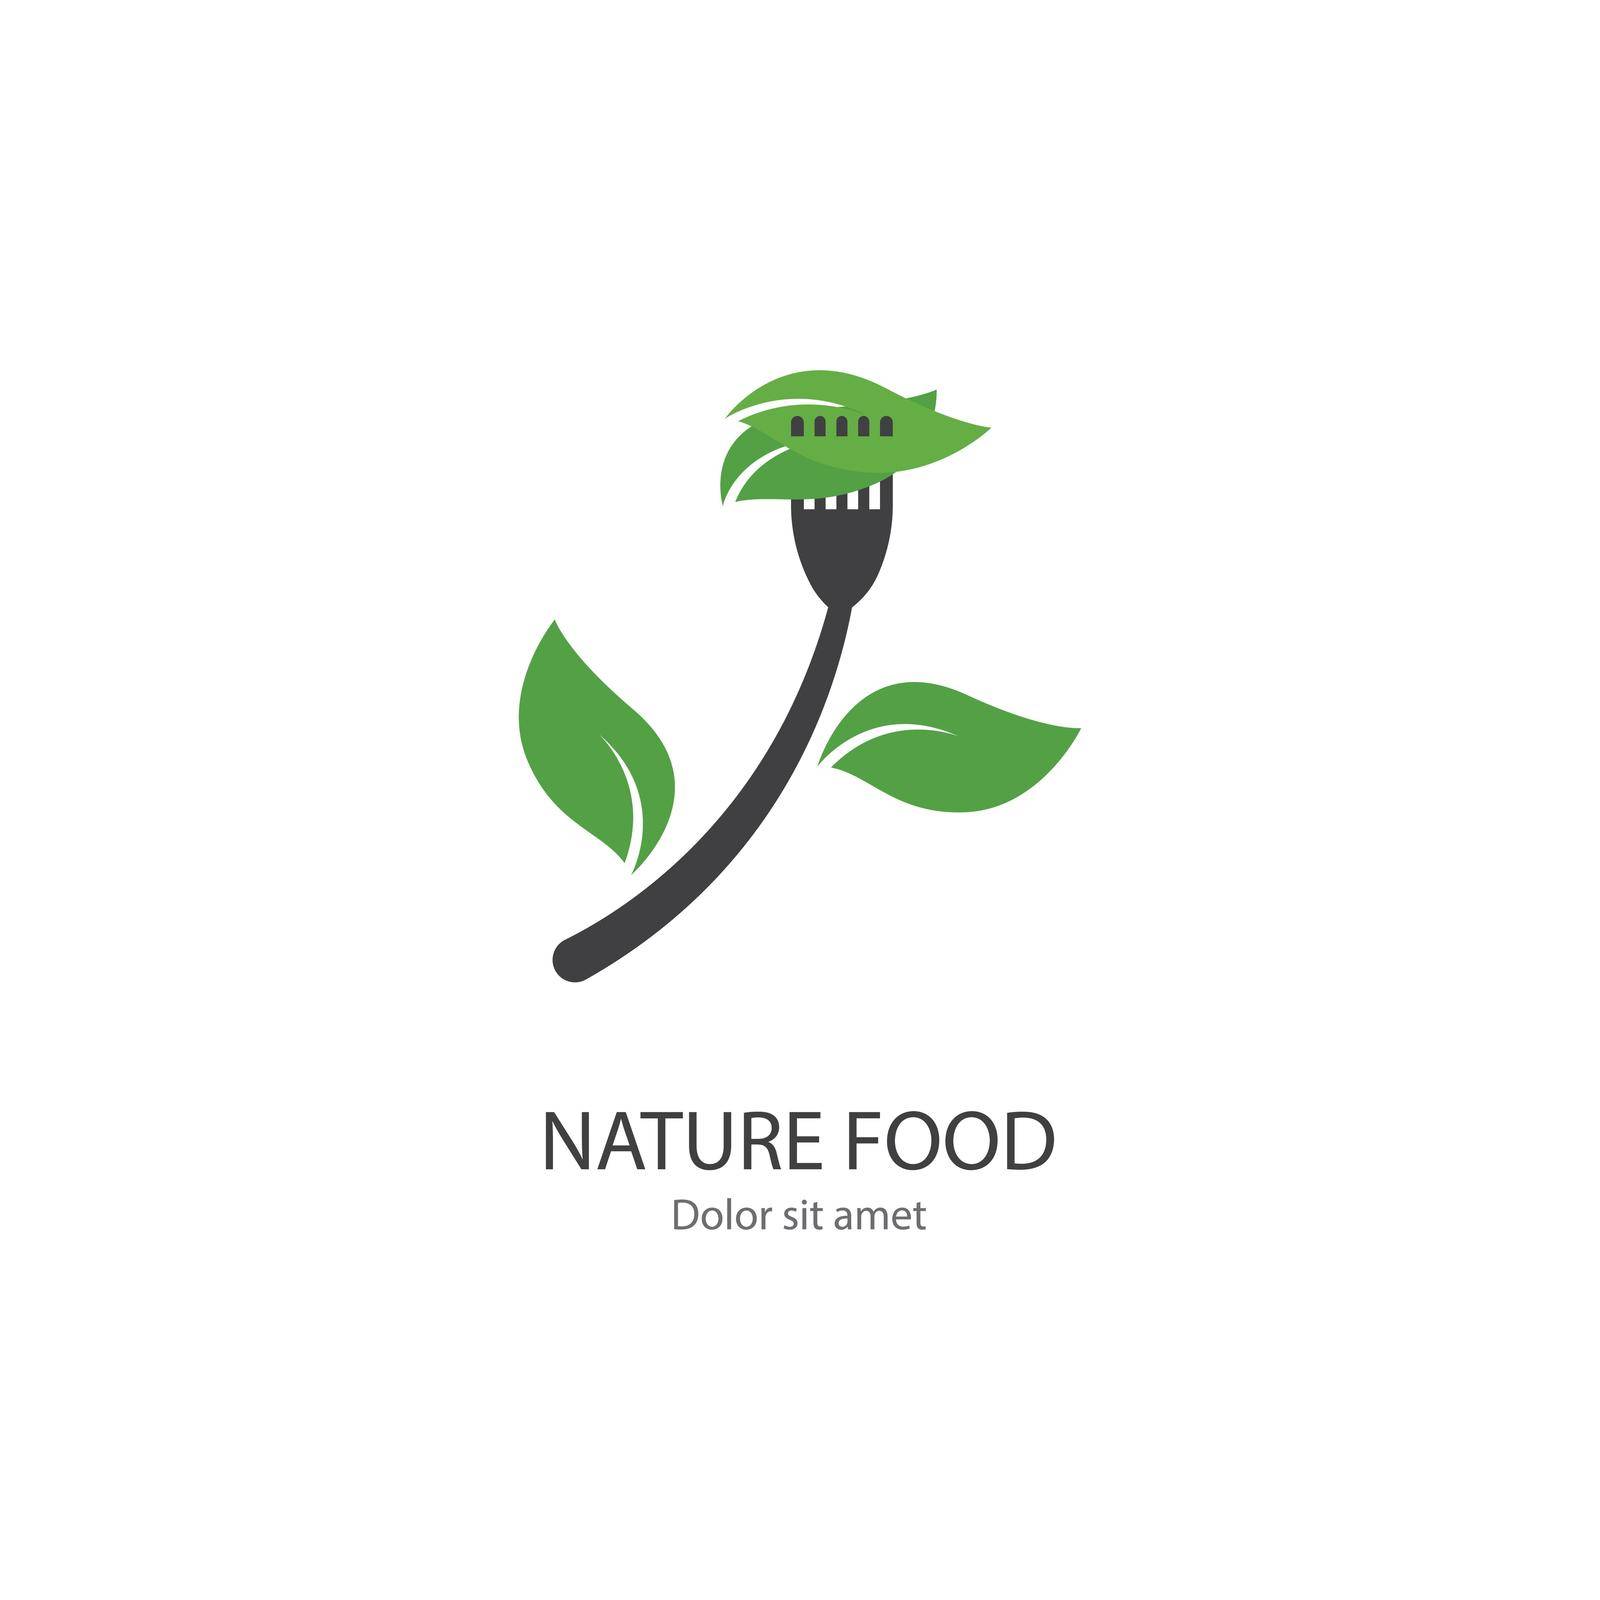 Nature food by awk